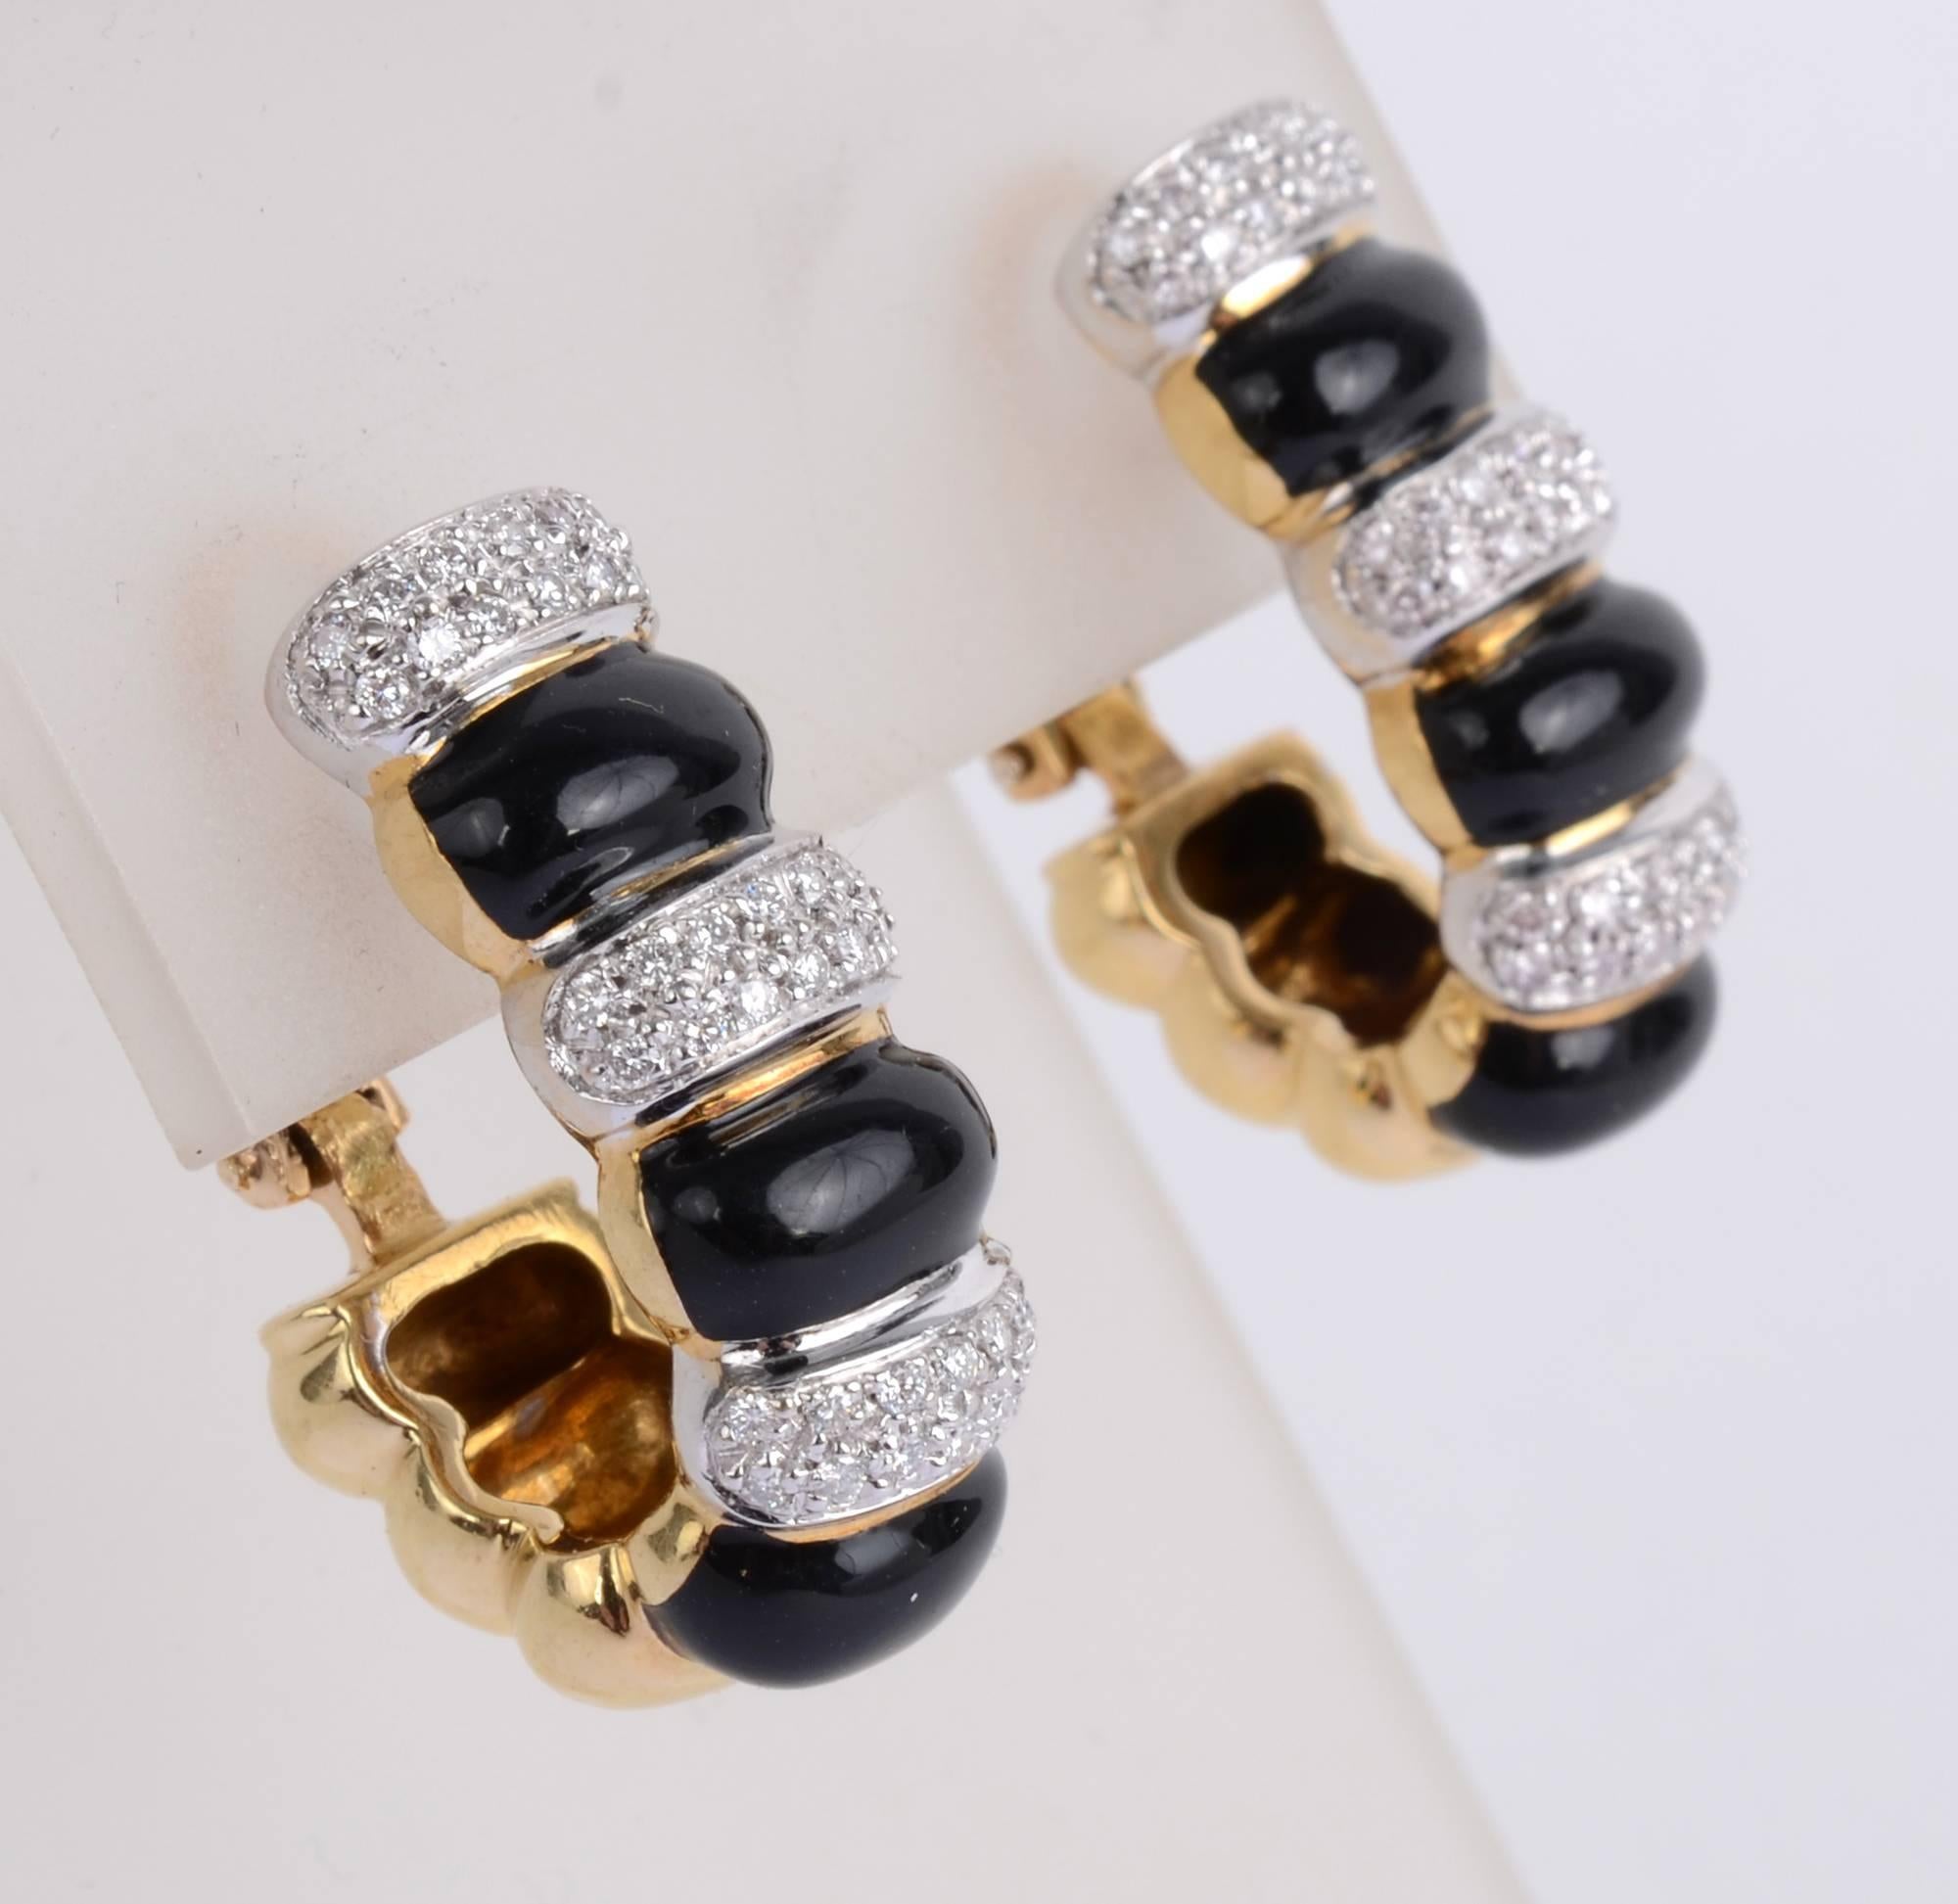 Snappy diamond and onyx elongated hoop earrings with both post and clip backs. Three plaques of black onyx alternate with three of pave diamonds.         The underside is made of three gold plaques that repeat the shape on the front. The diamonds